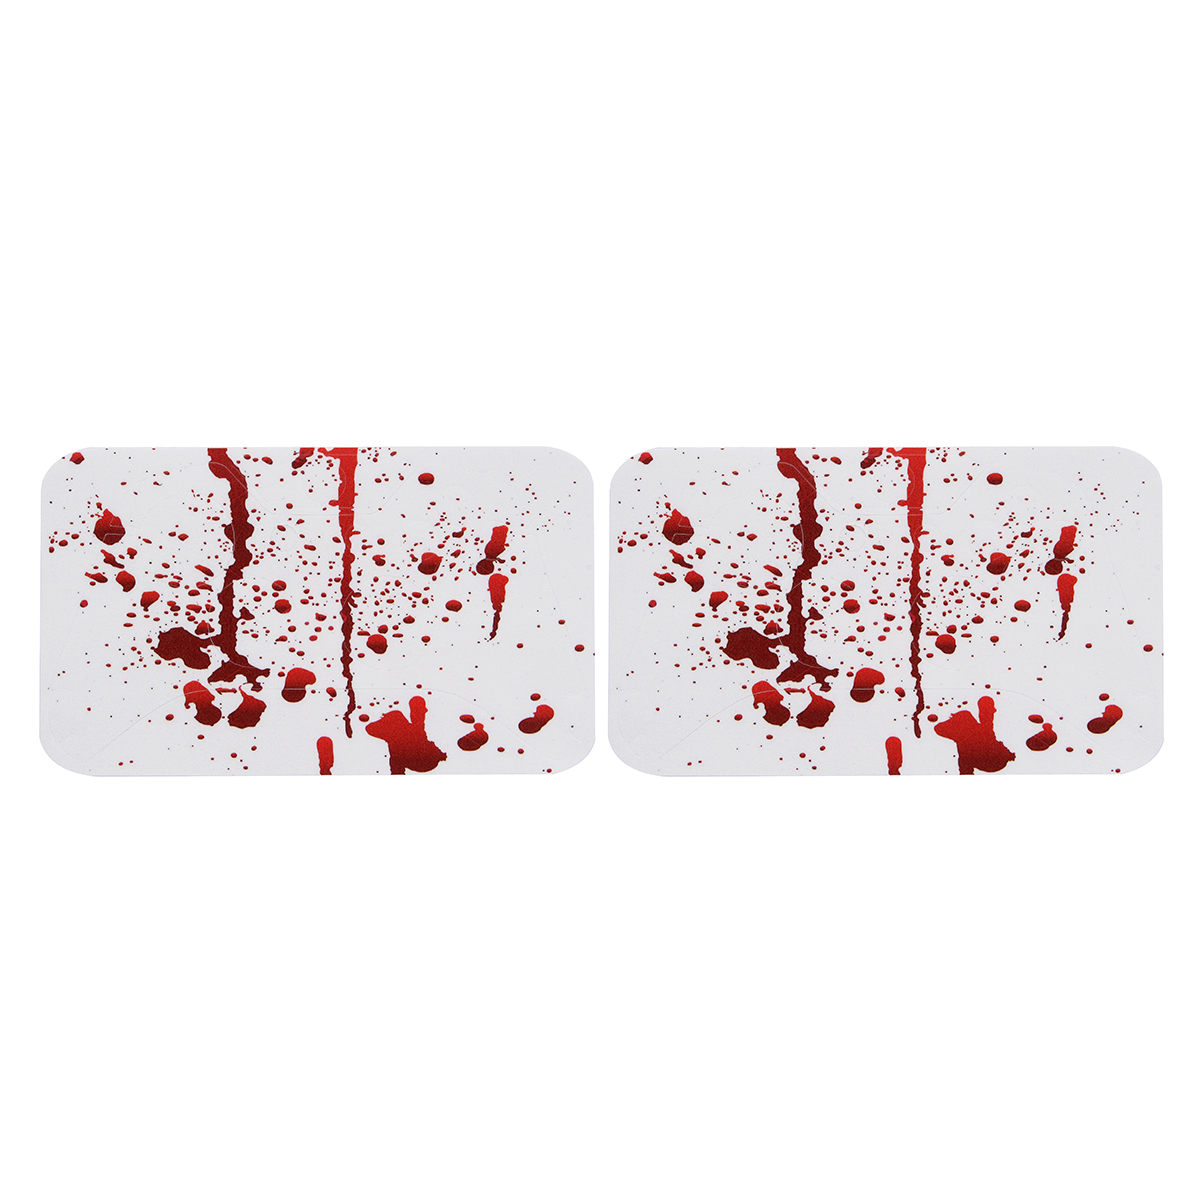 Bloody Skin Decals Stickers Cover for Xbox One S Game Console & 2 Controllers 27